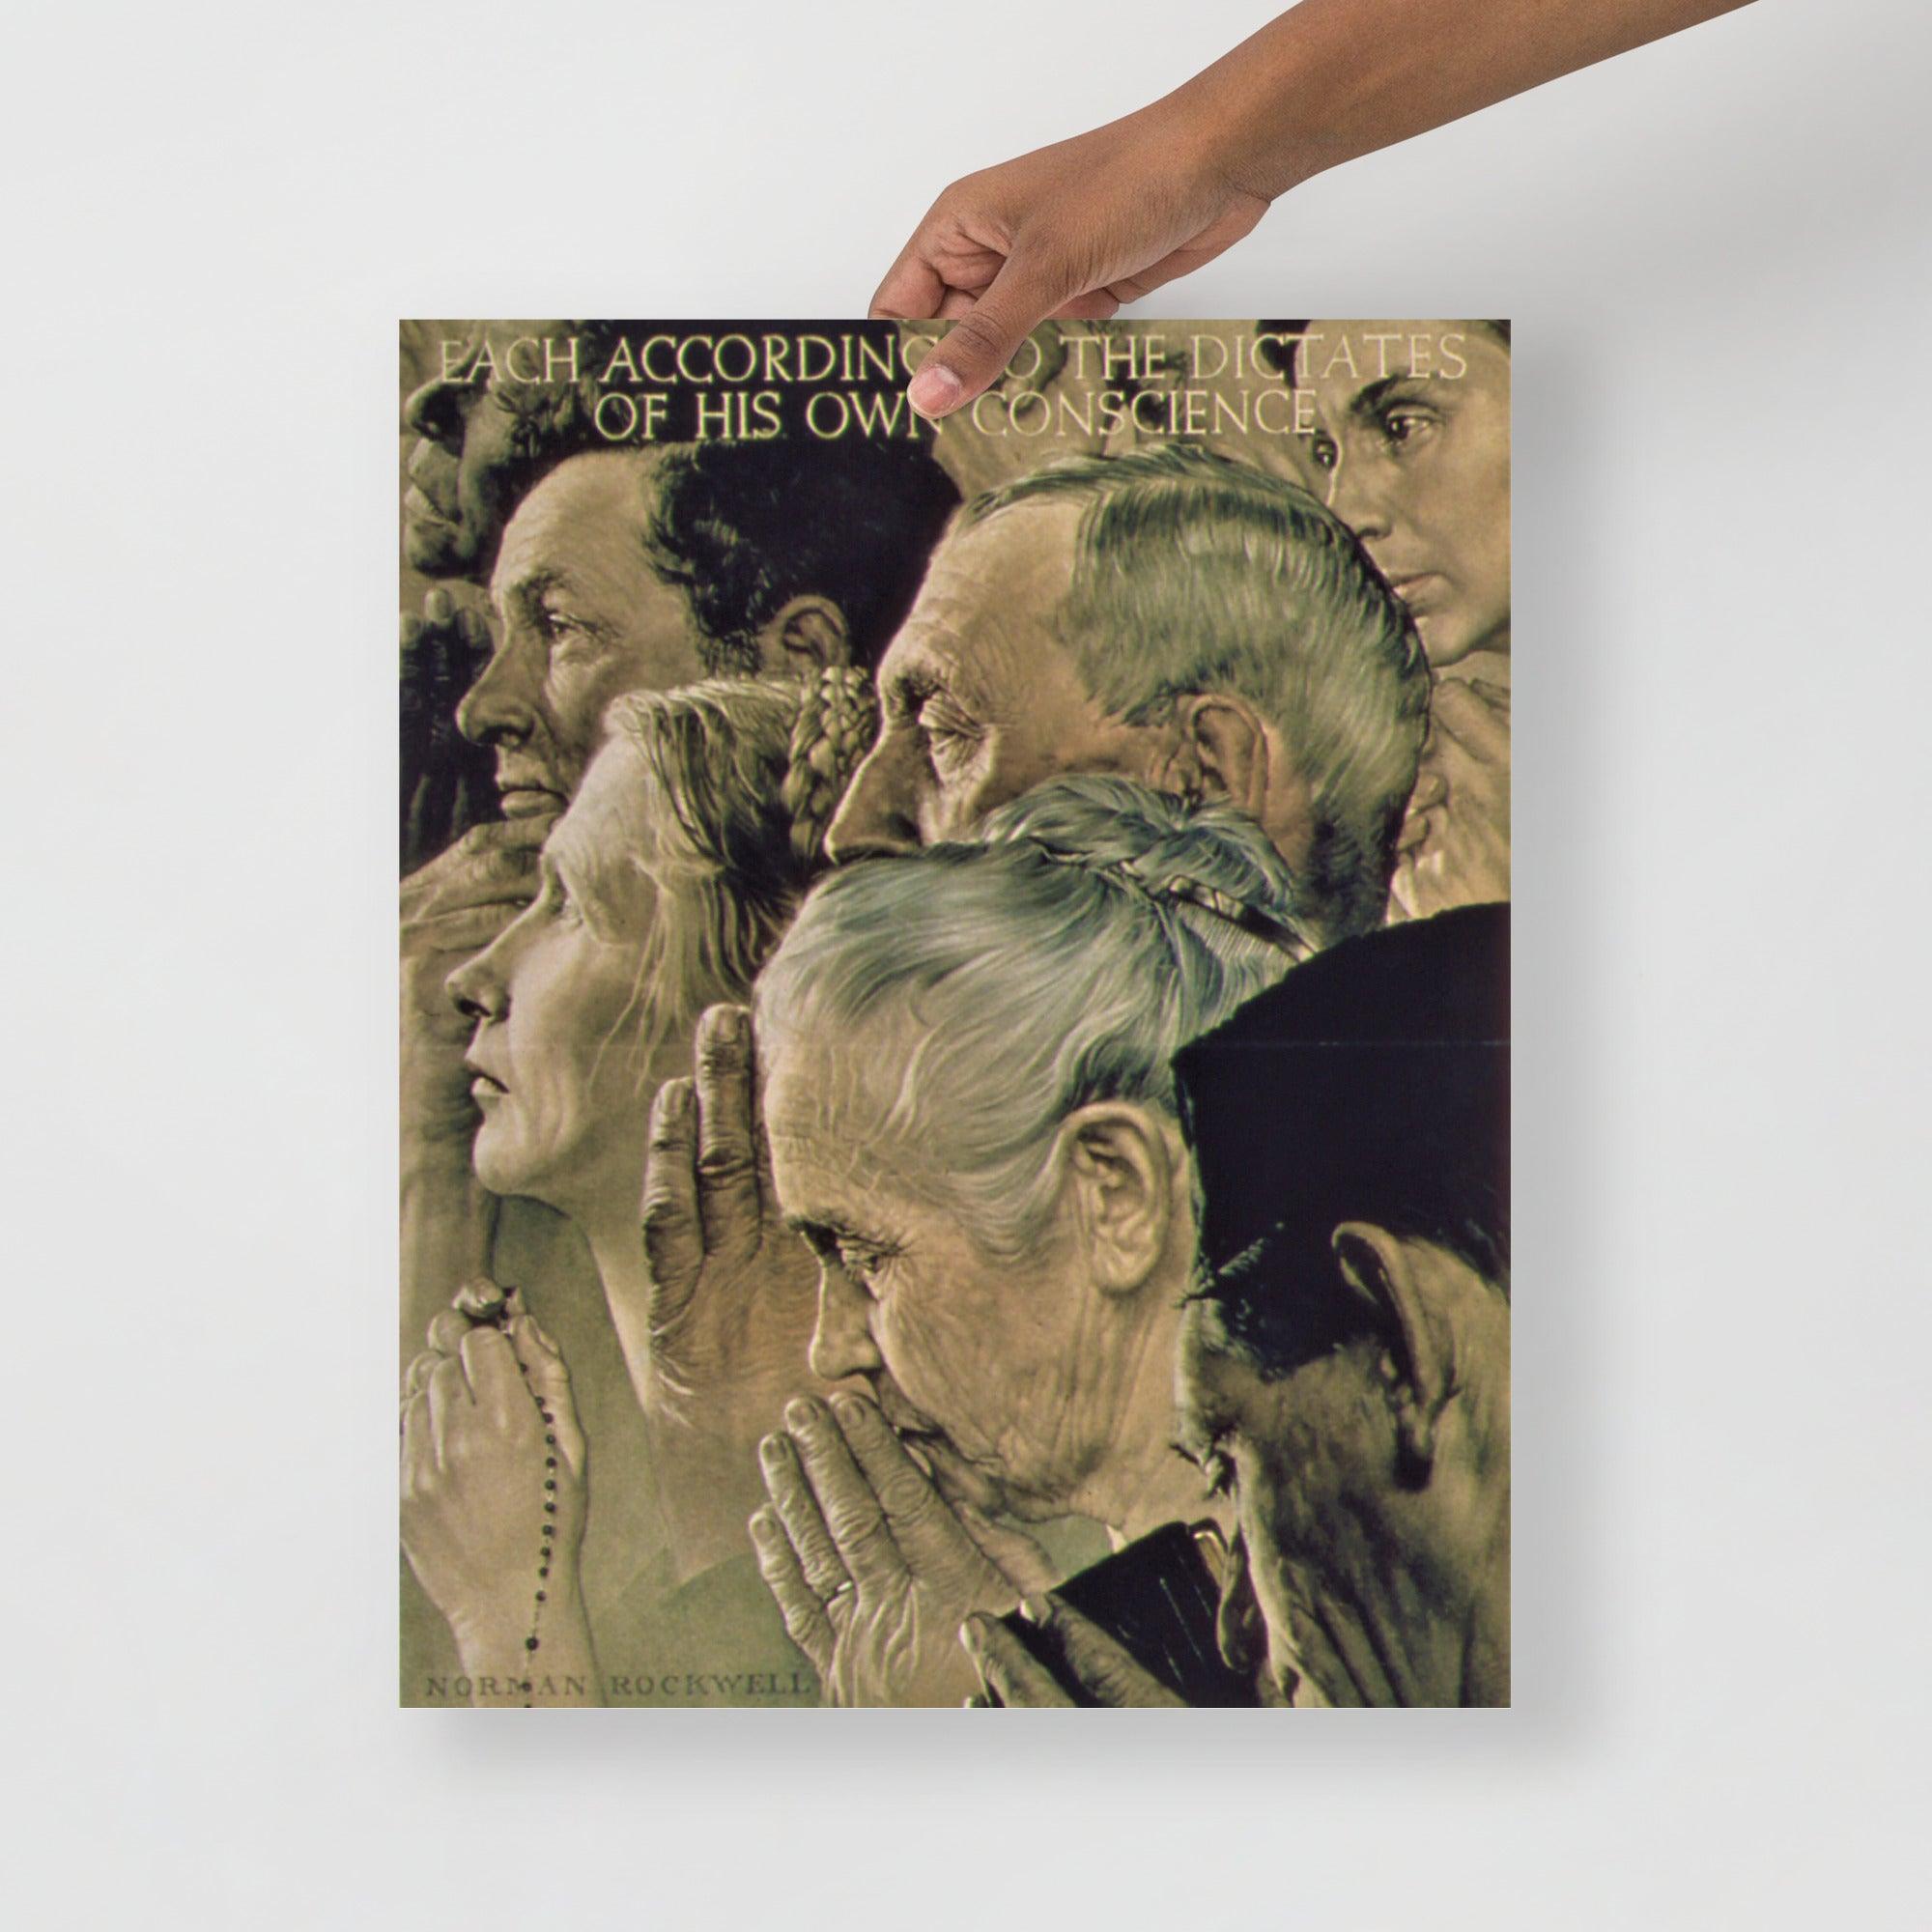 A Freedom of Worship by Norman Rockwell  poster on a plain backdrop in size 16x20”.